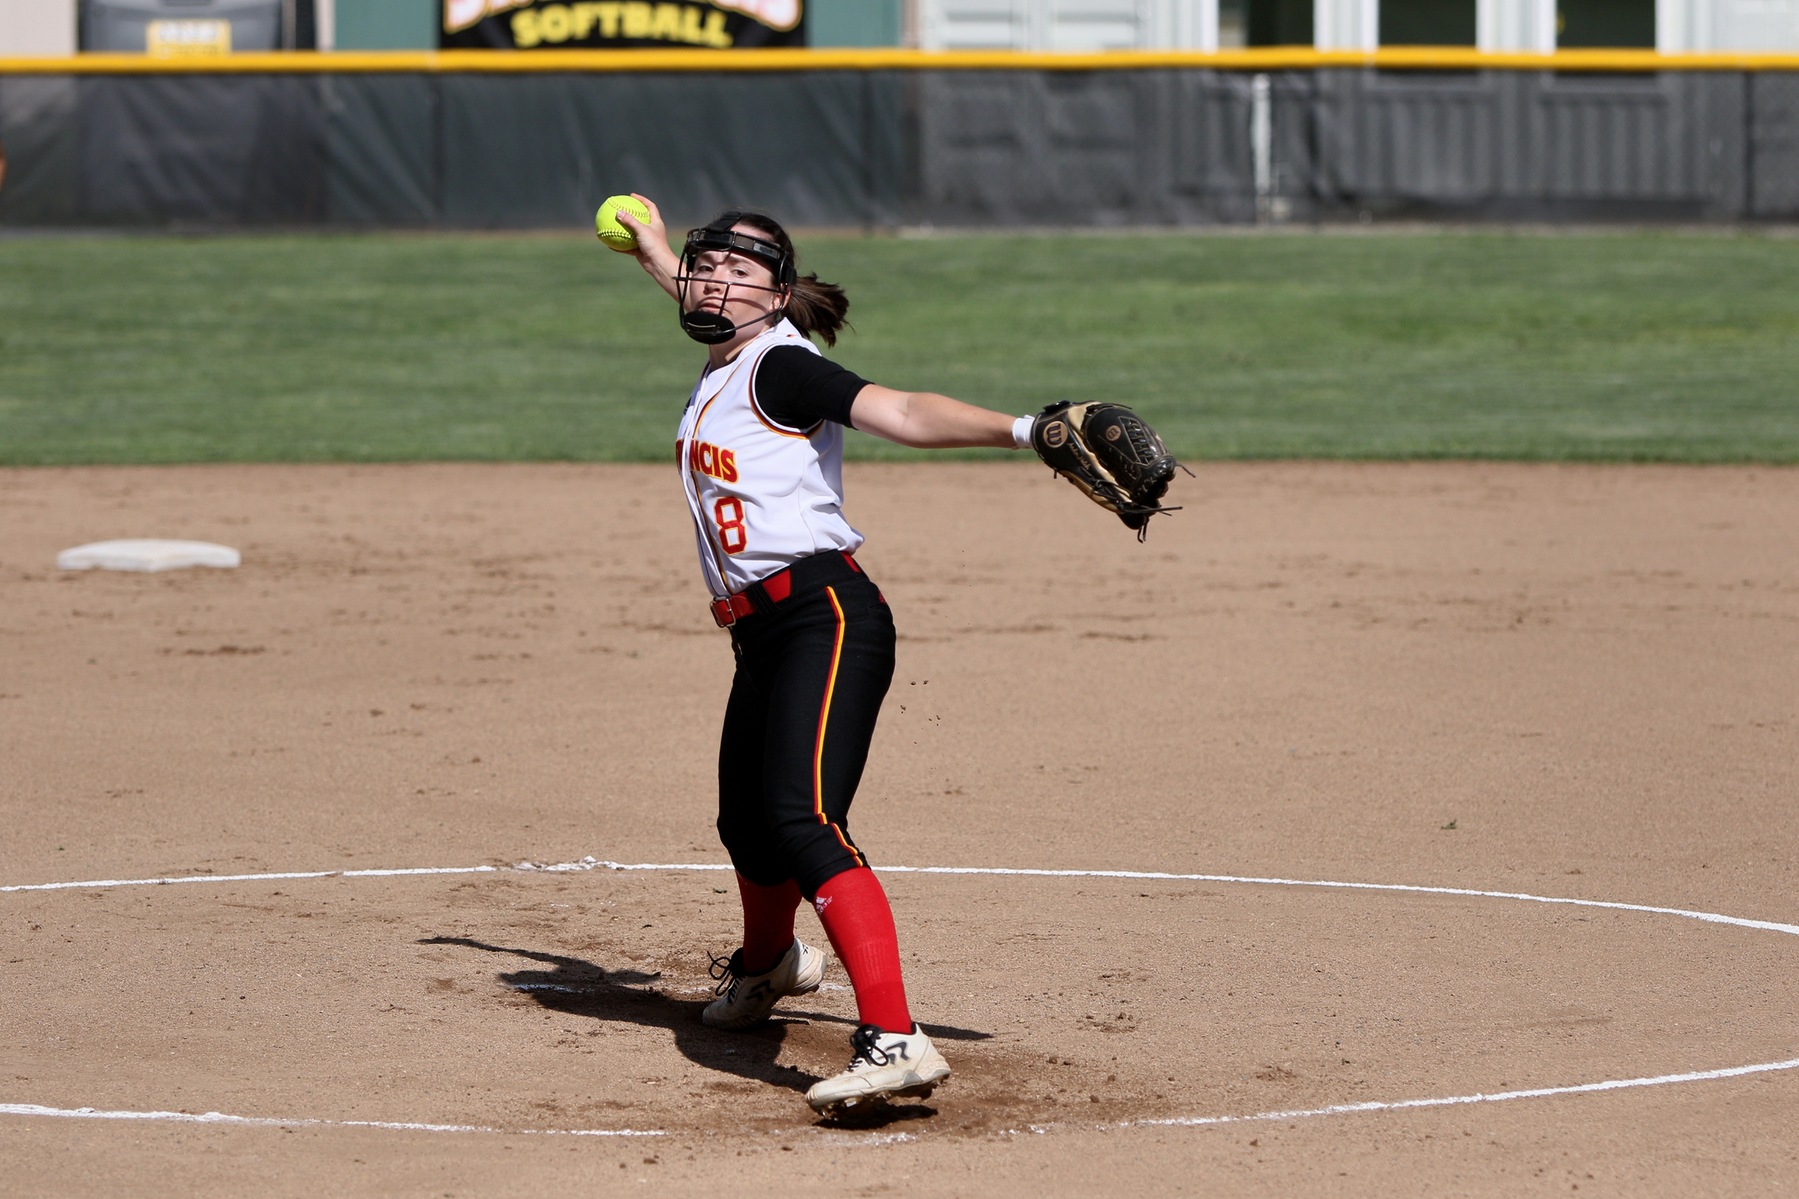 Hatch Throws Shutout in 14-0 Win over Pioneer